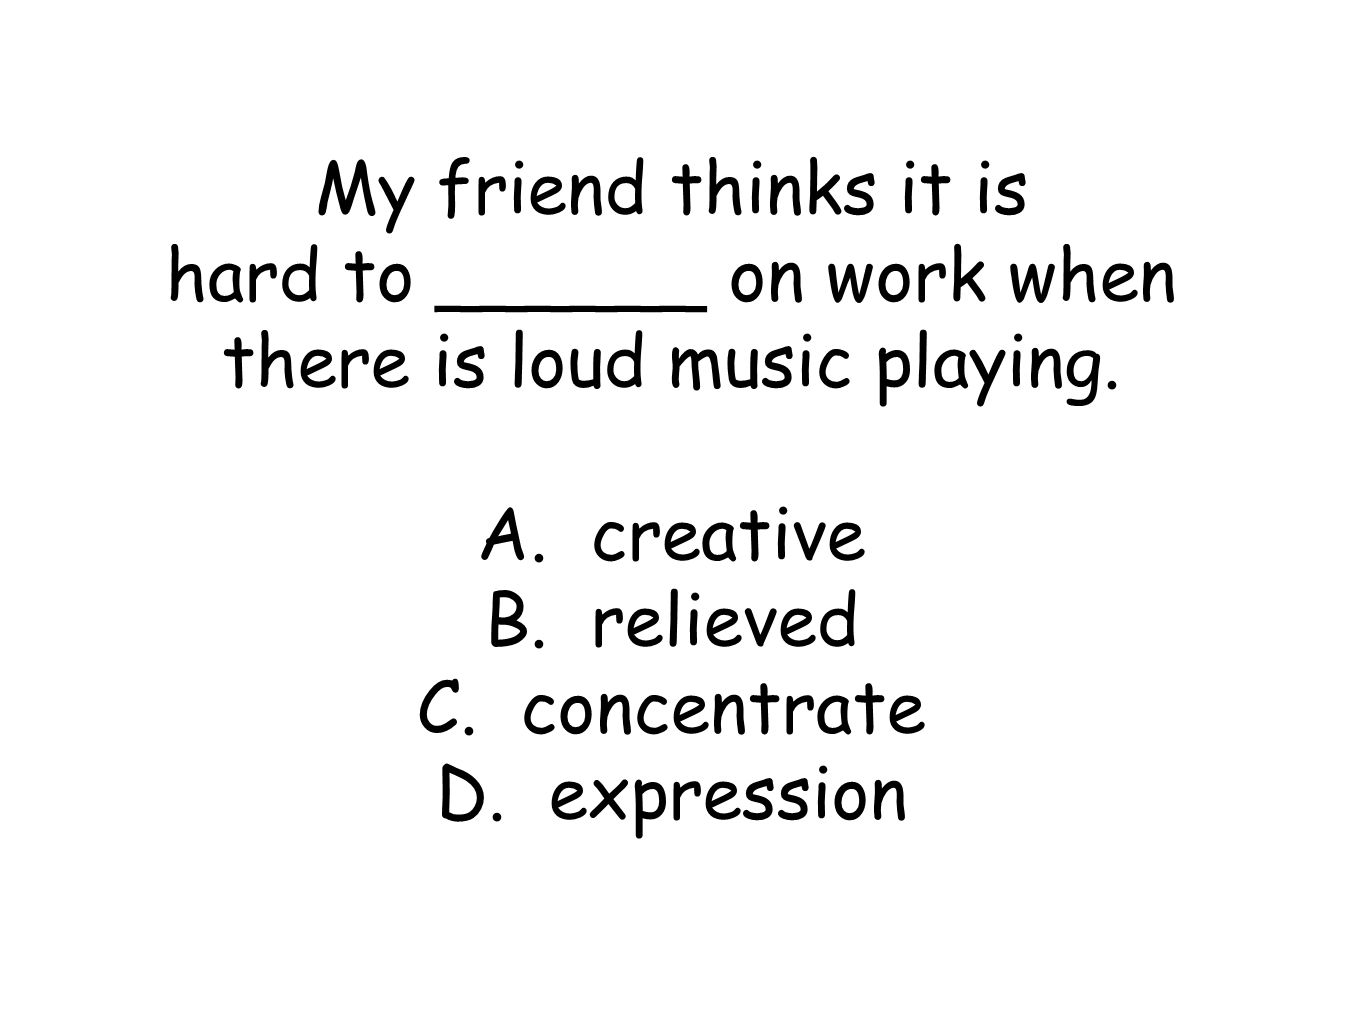 My friend thinks it is hard to ______ on work when there is loud music playing.